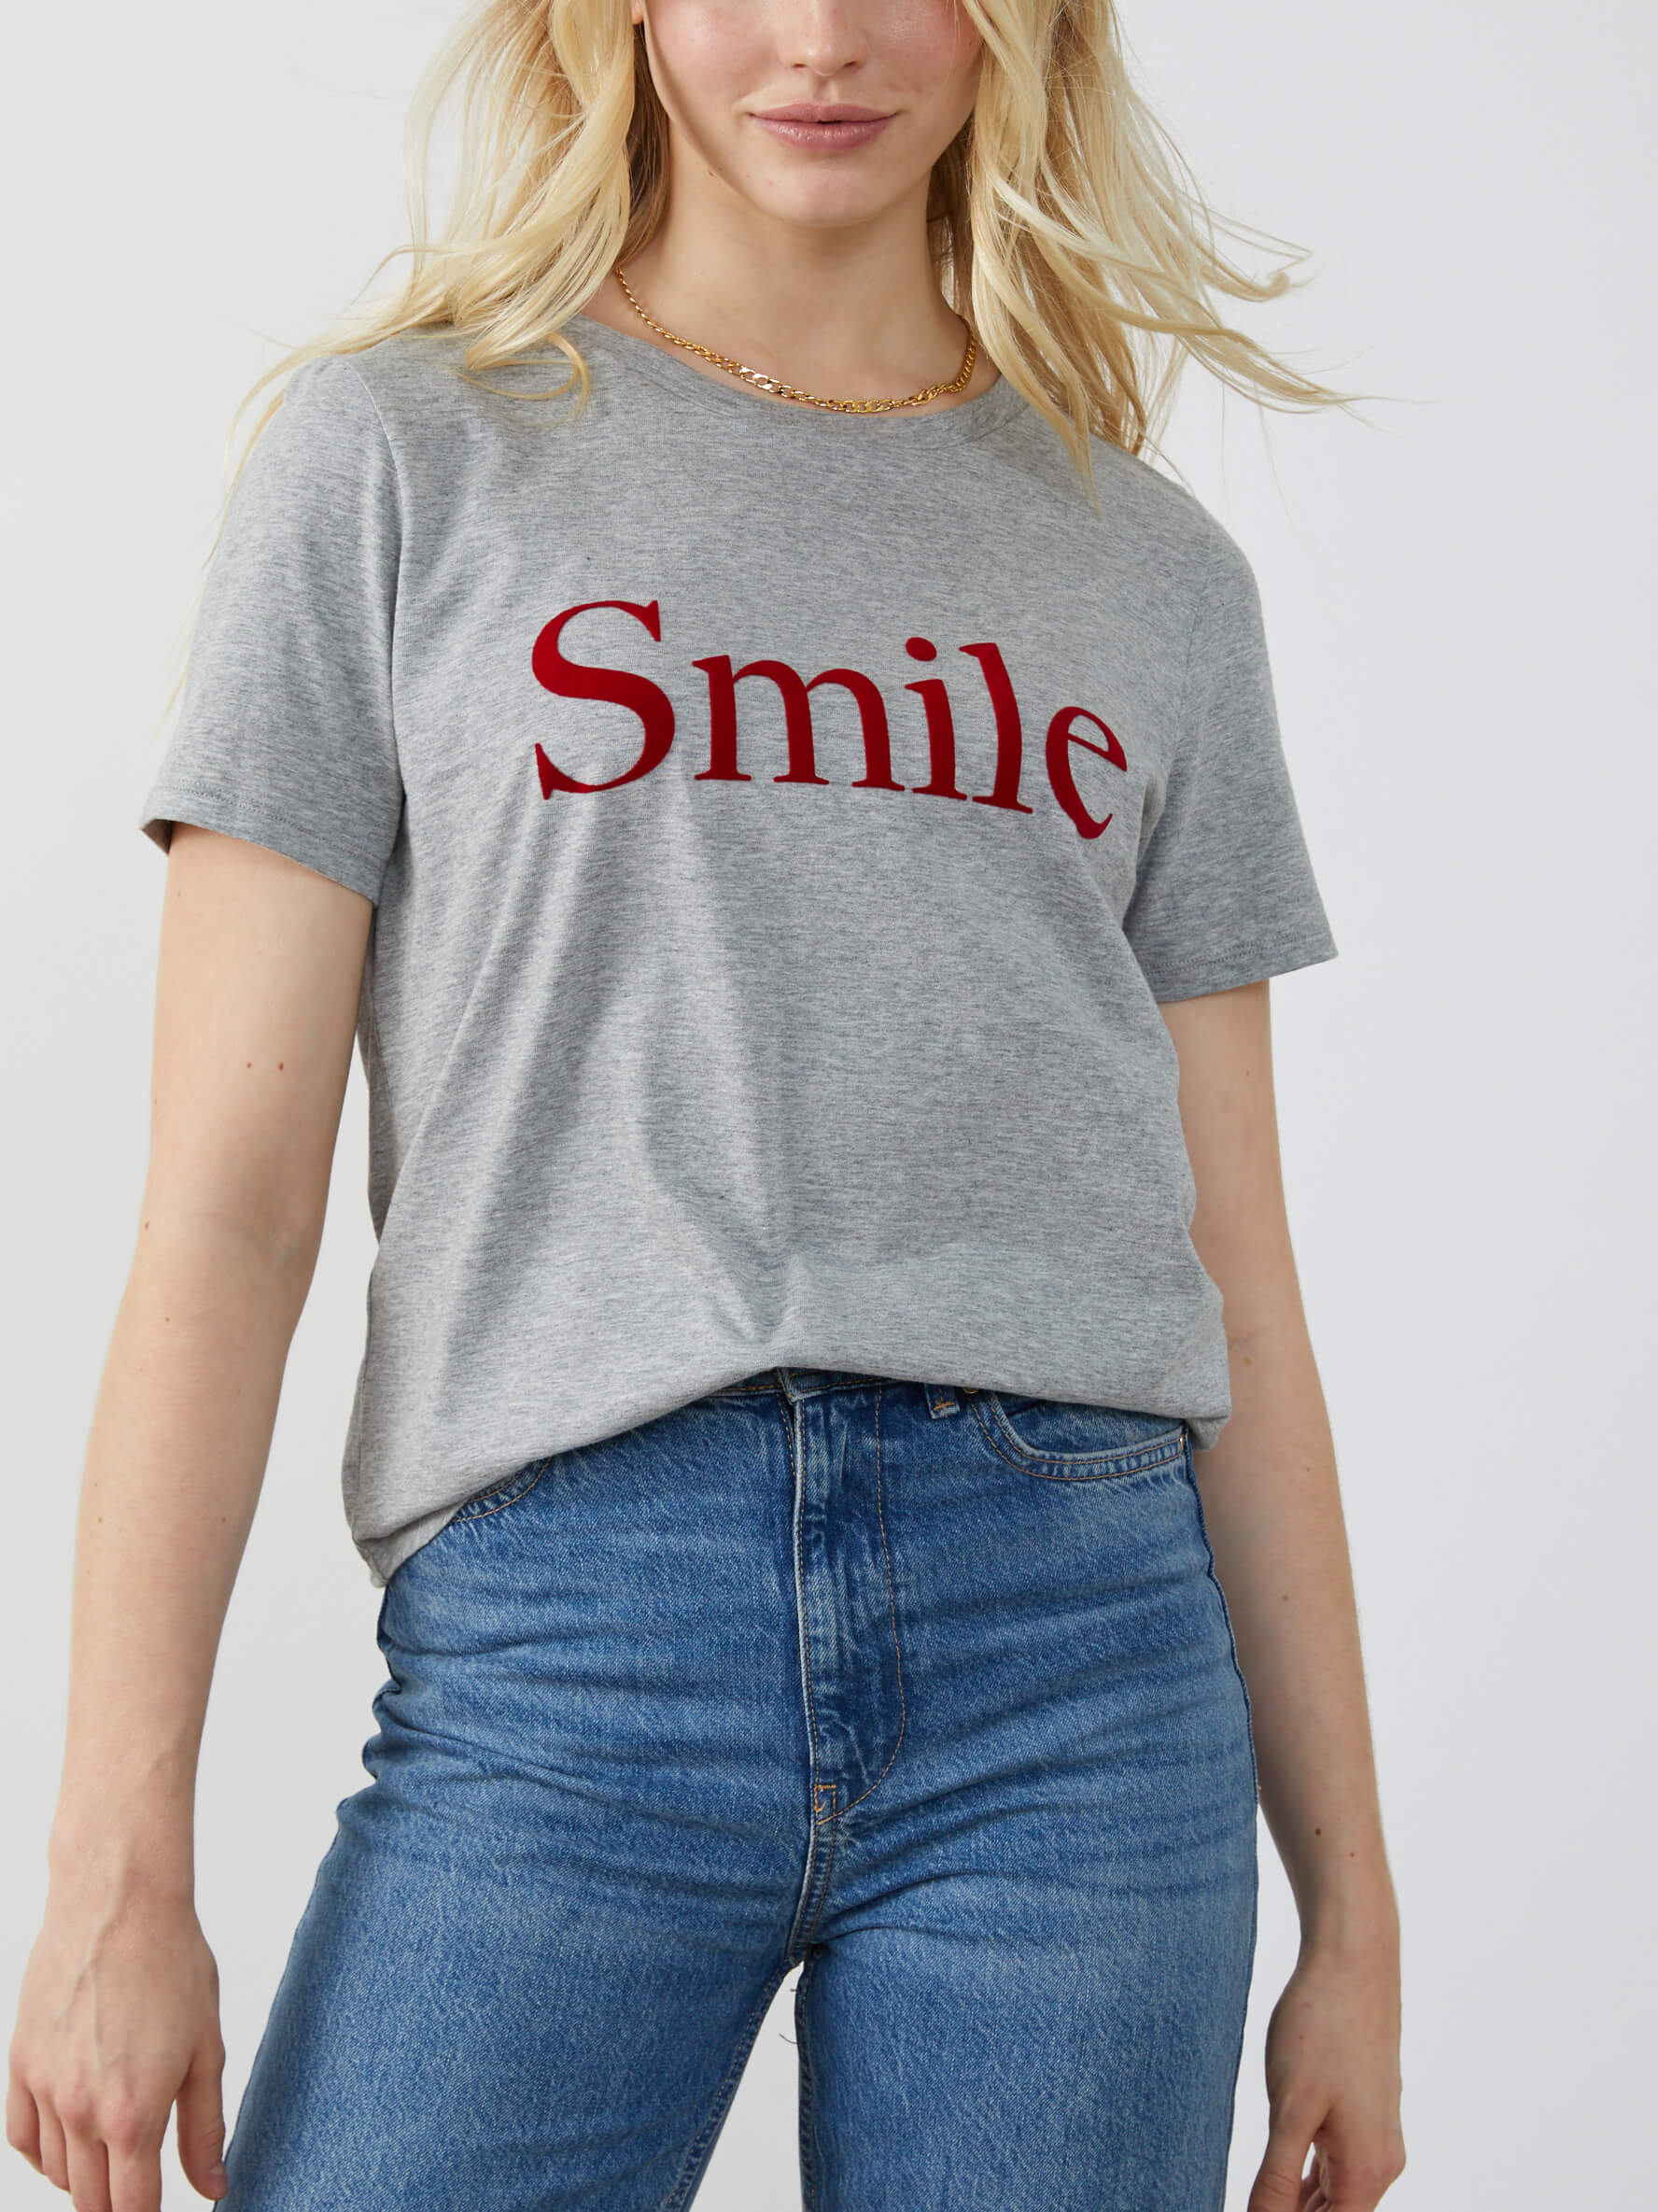 Gå forud At Ugyldigt Lola - Loose Tee - Smile - Heather Grey | designer, pima cotton, exclusive  graphics, high quality, luxurious, soft